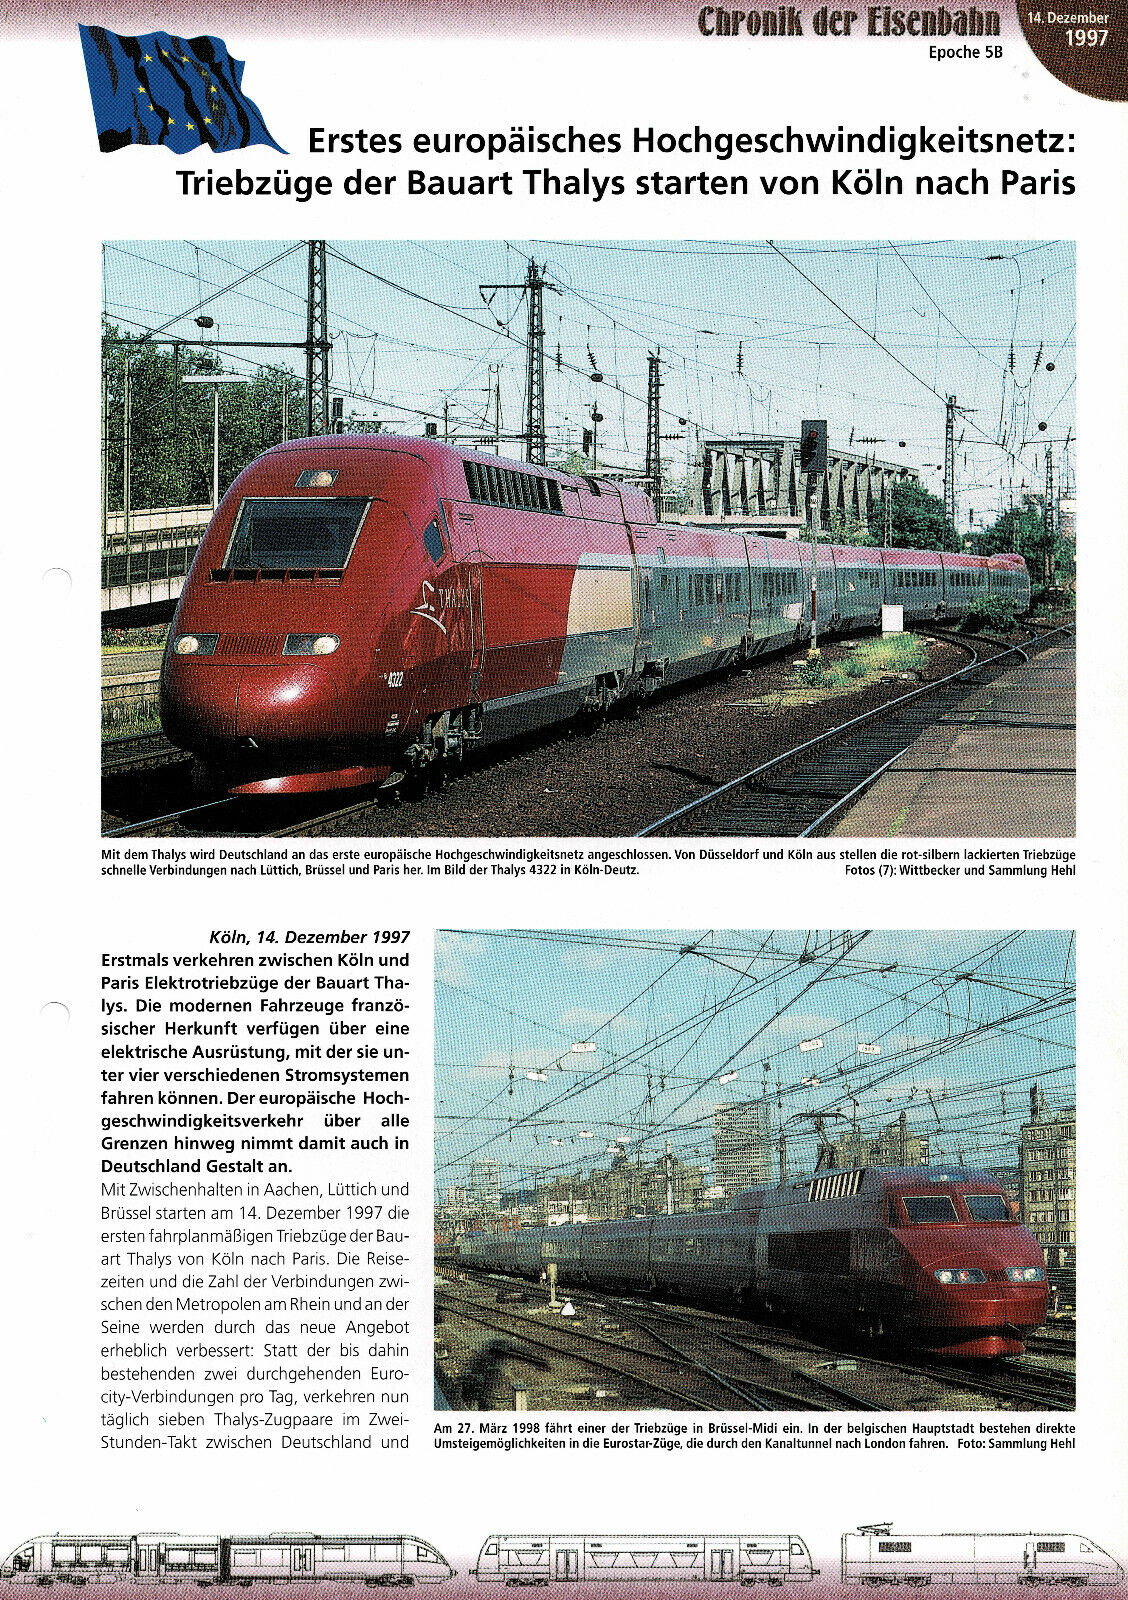 Thalys trains start from Cologne to Paris info card